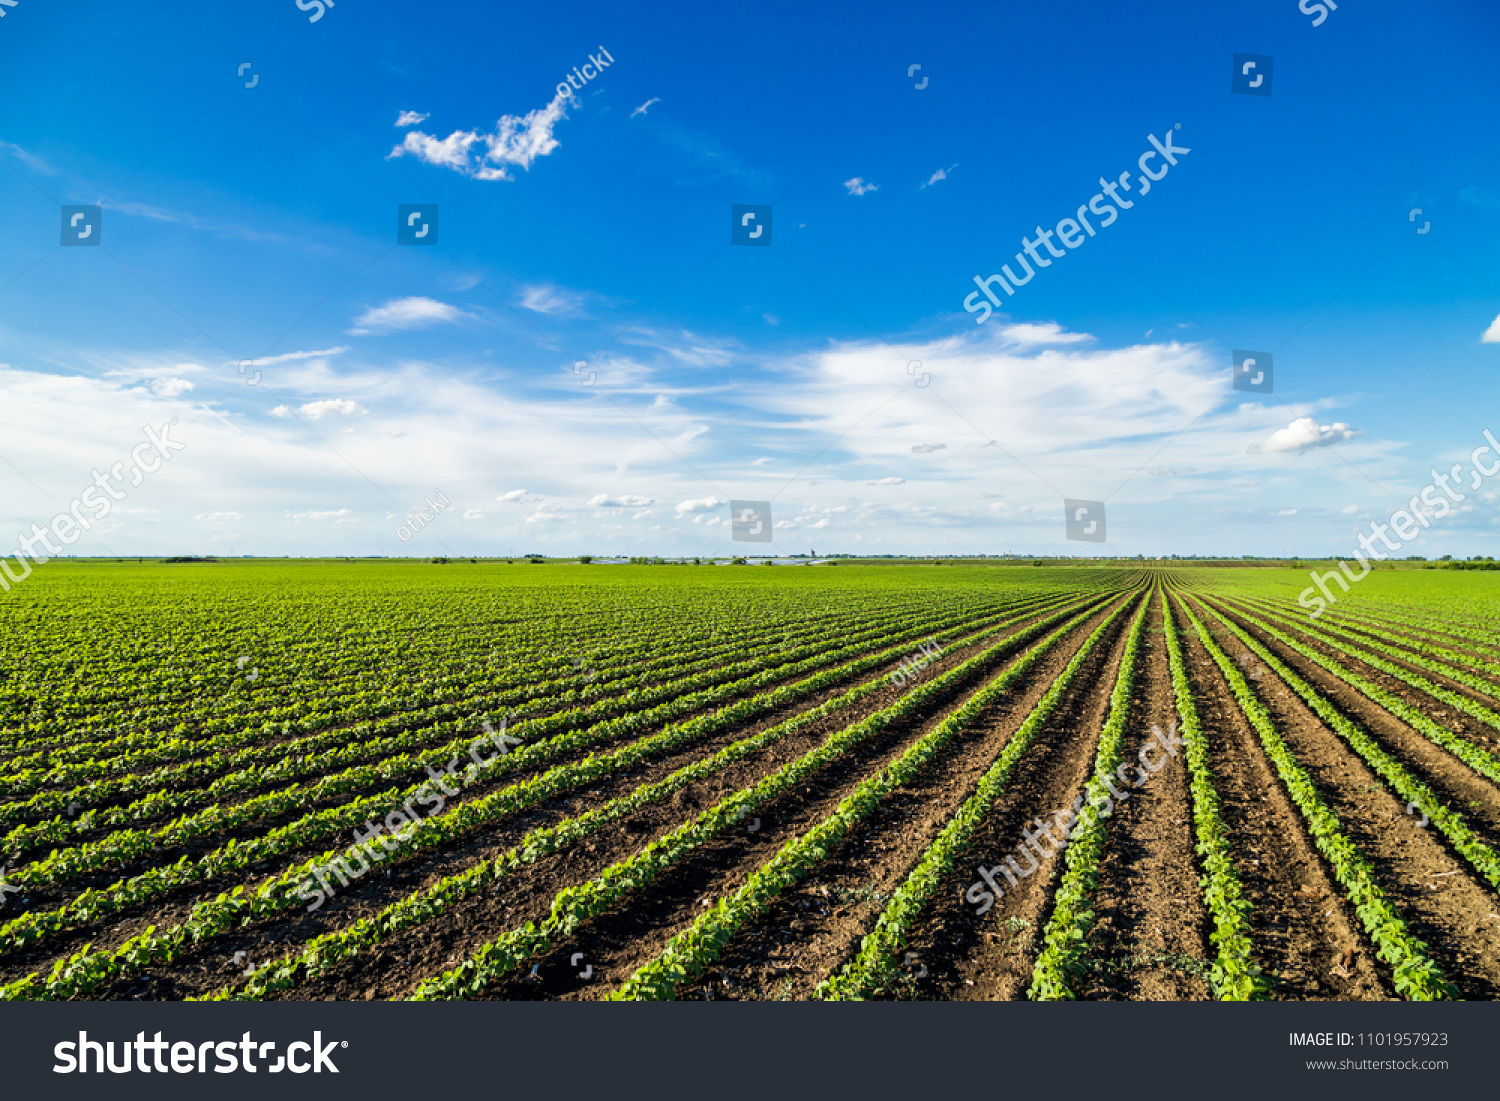 Green ripening soybean field, agricultural landscape #1101957923